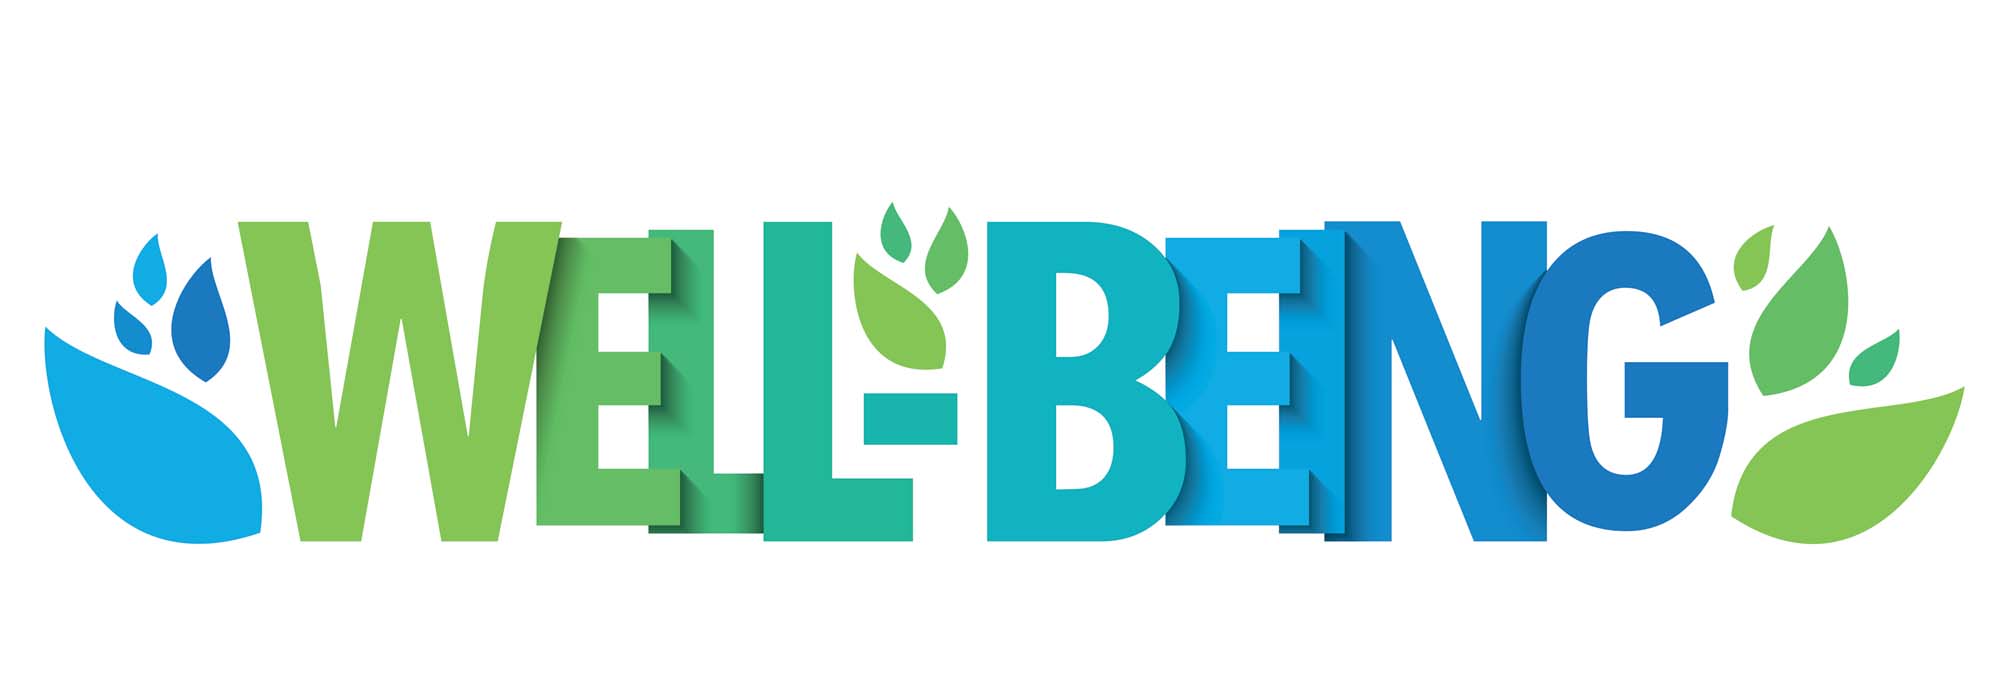 Well-being spelled out in block letters in a green to blue gradient with green leaves to the right and blue leaves to the left of the words.